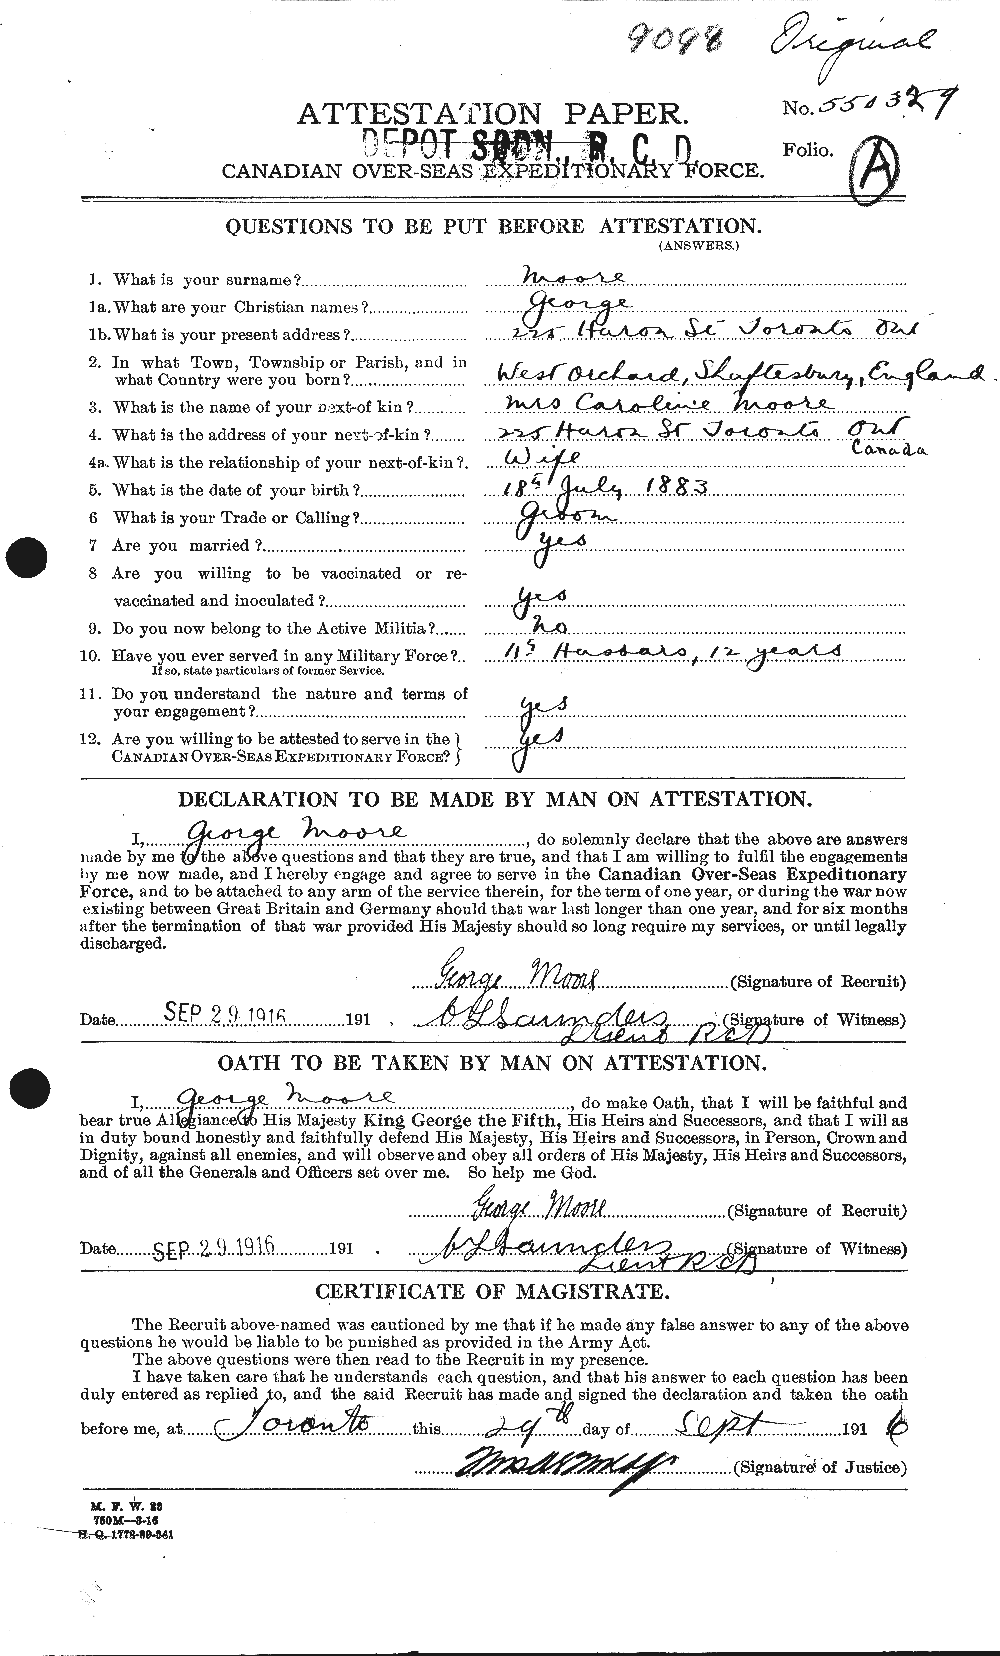 Personnel Records of the First World War - CEF 509401a